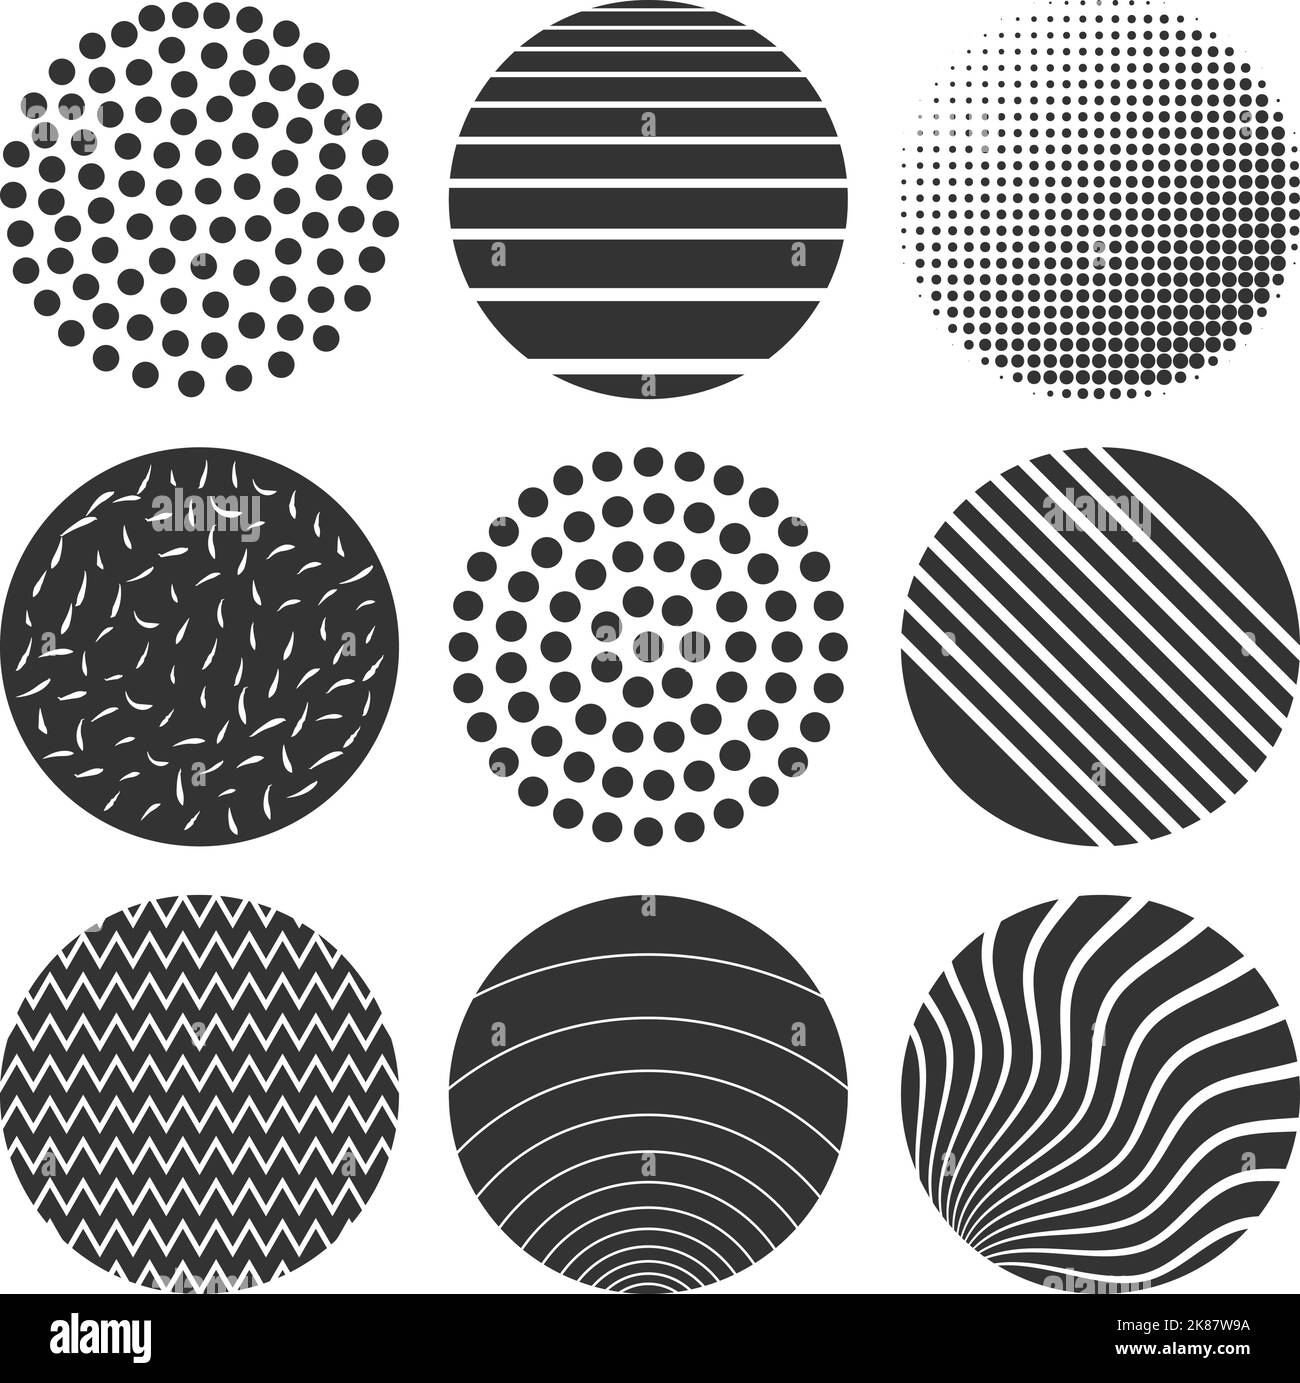 set of circular geometric shapes, vintage and retro design elements isolated on white vector illustration Stock Vector